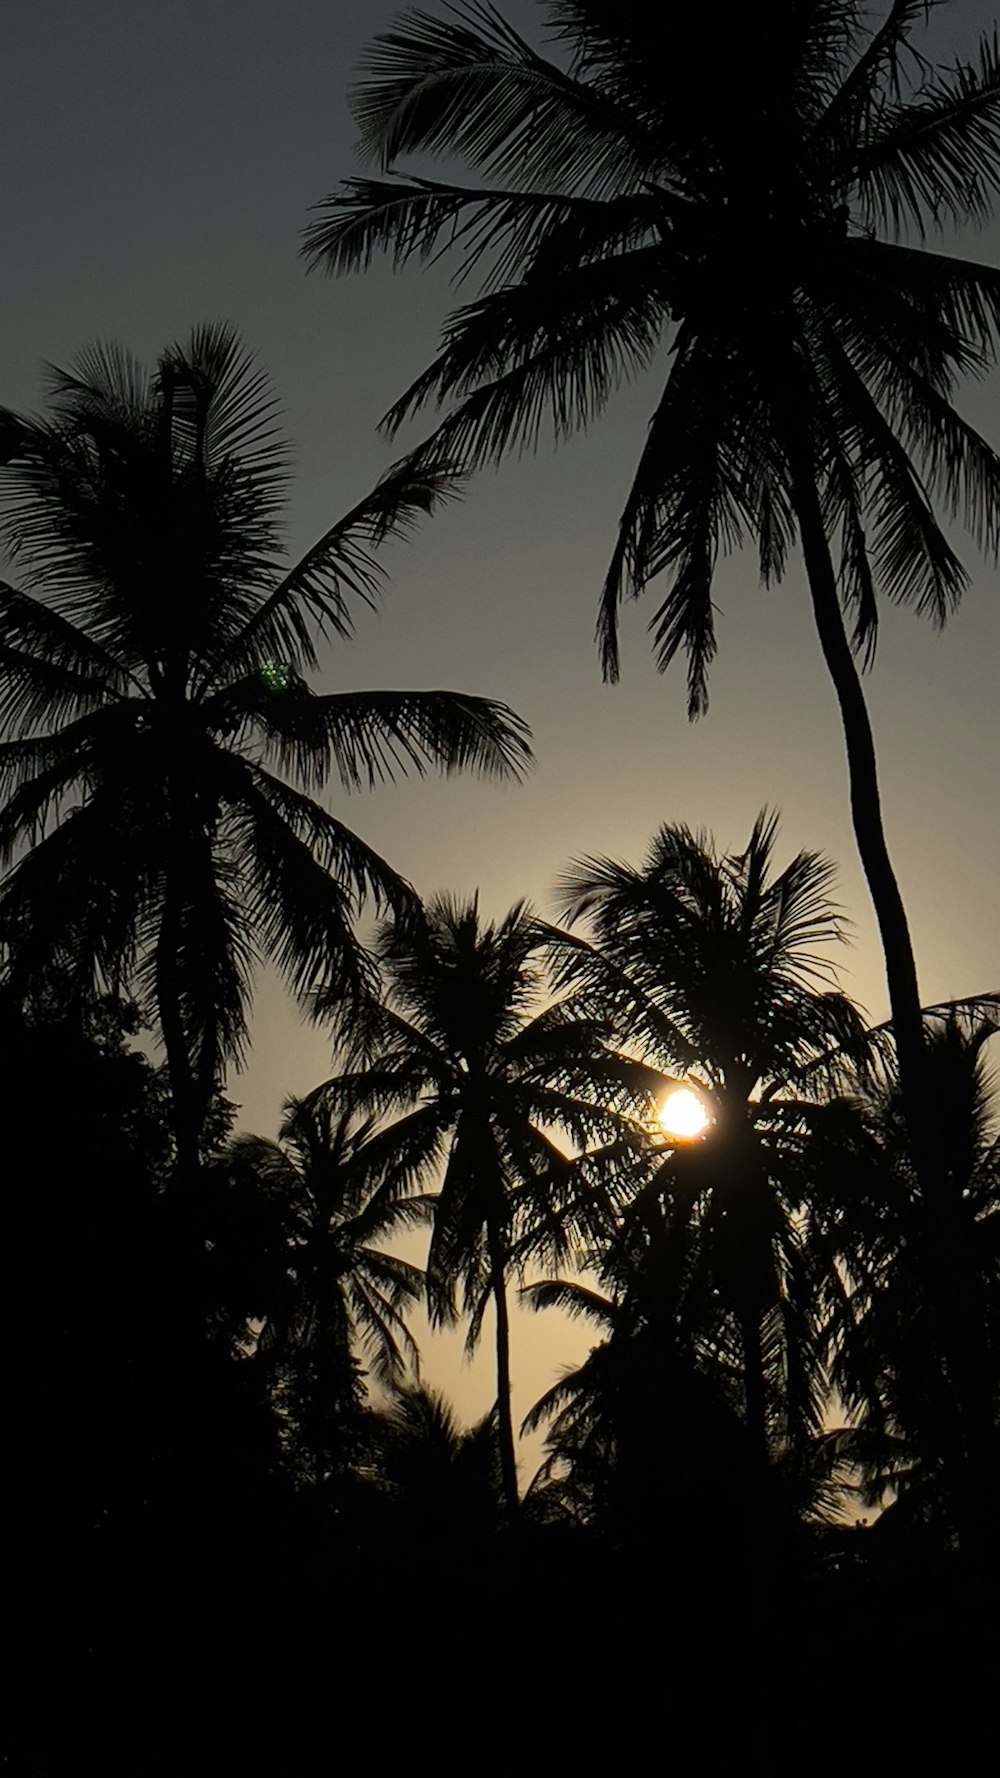 the sun is setting behind the silhouette of palm trees